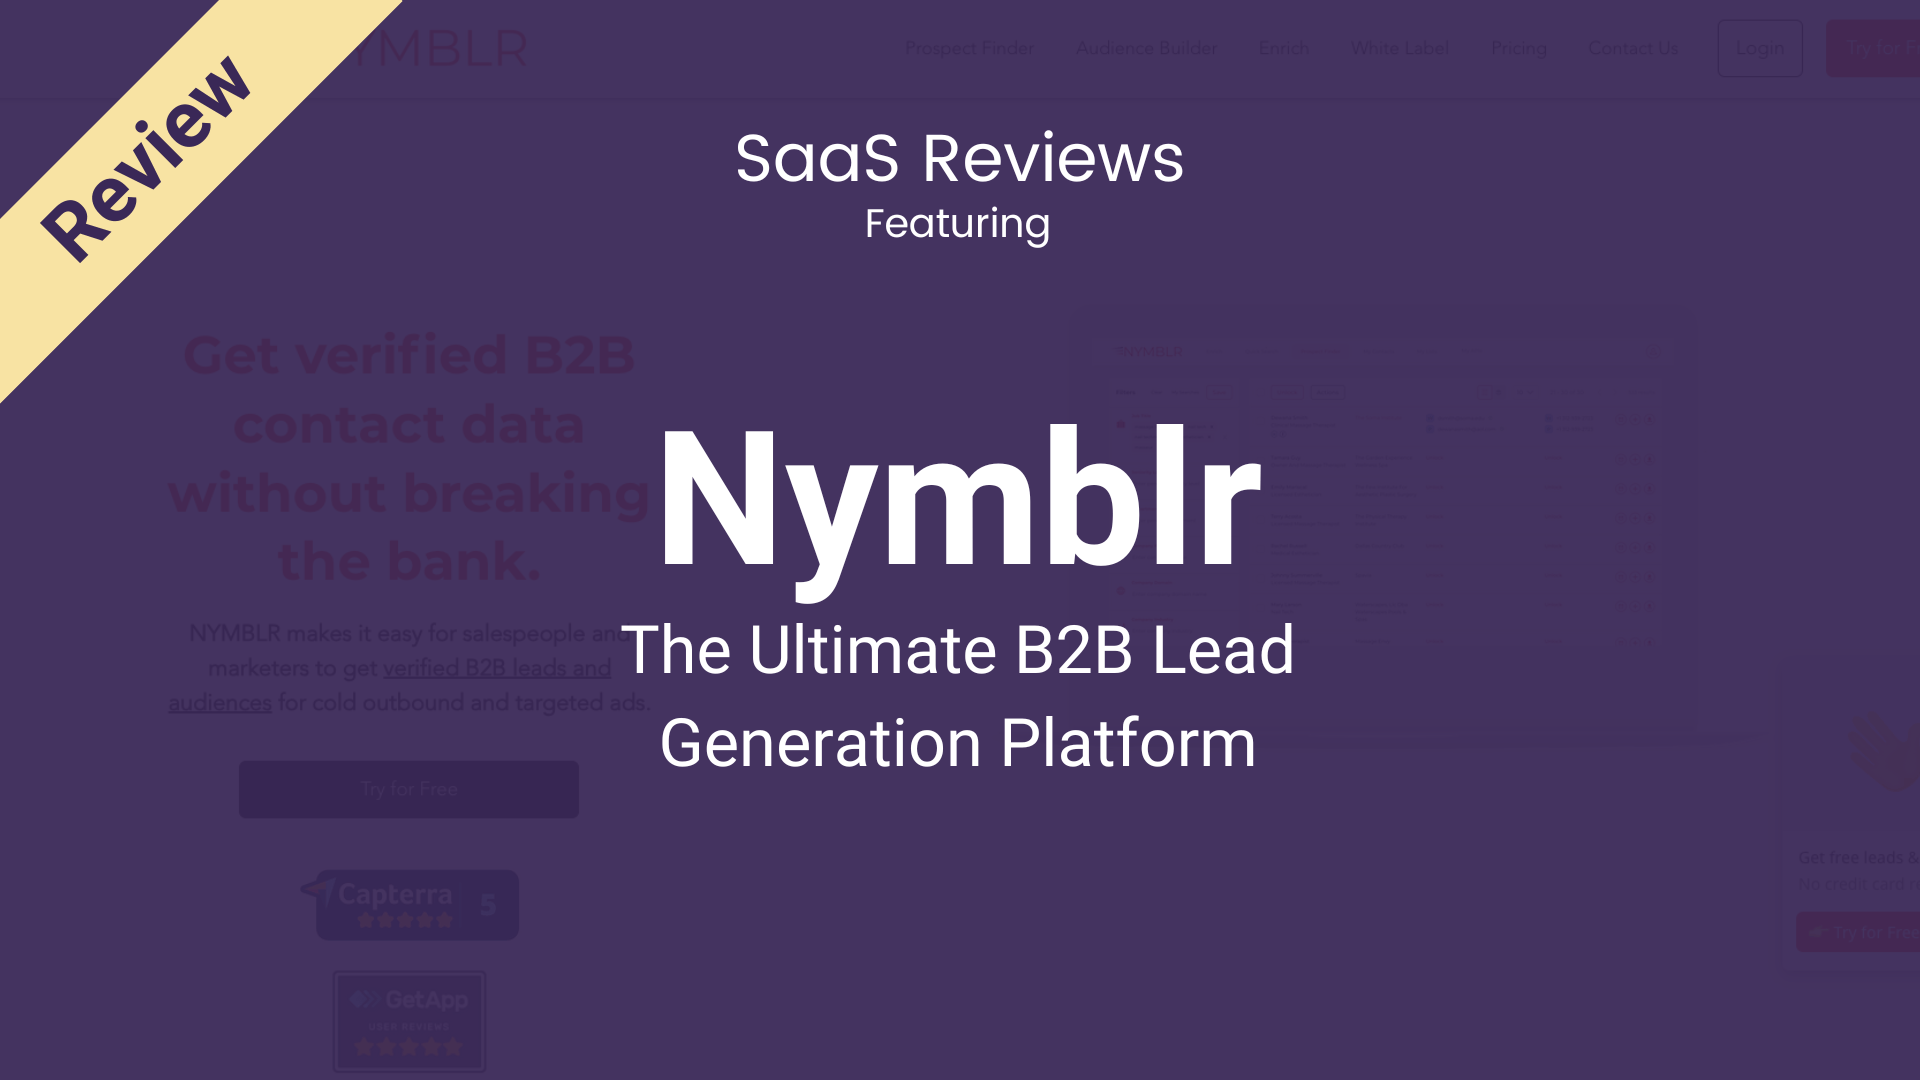 Nymblr Review: The Ultimate B2B Lead Generation Platform